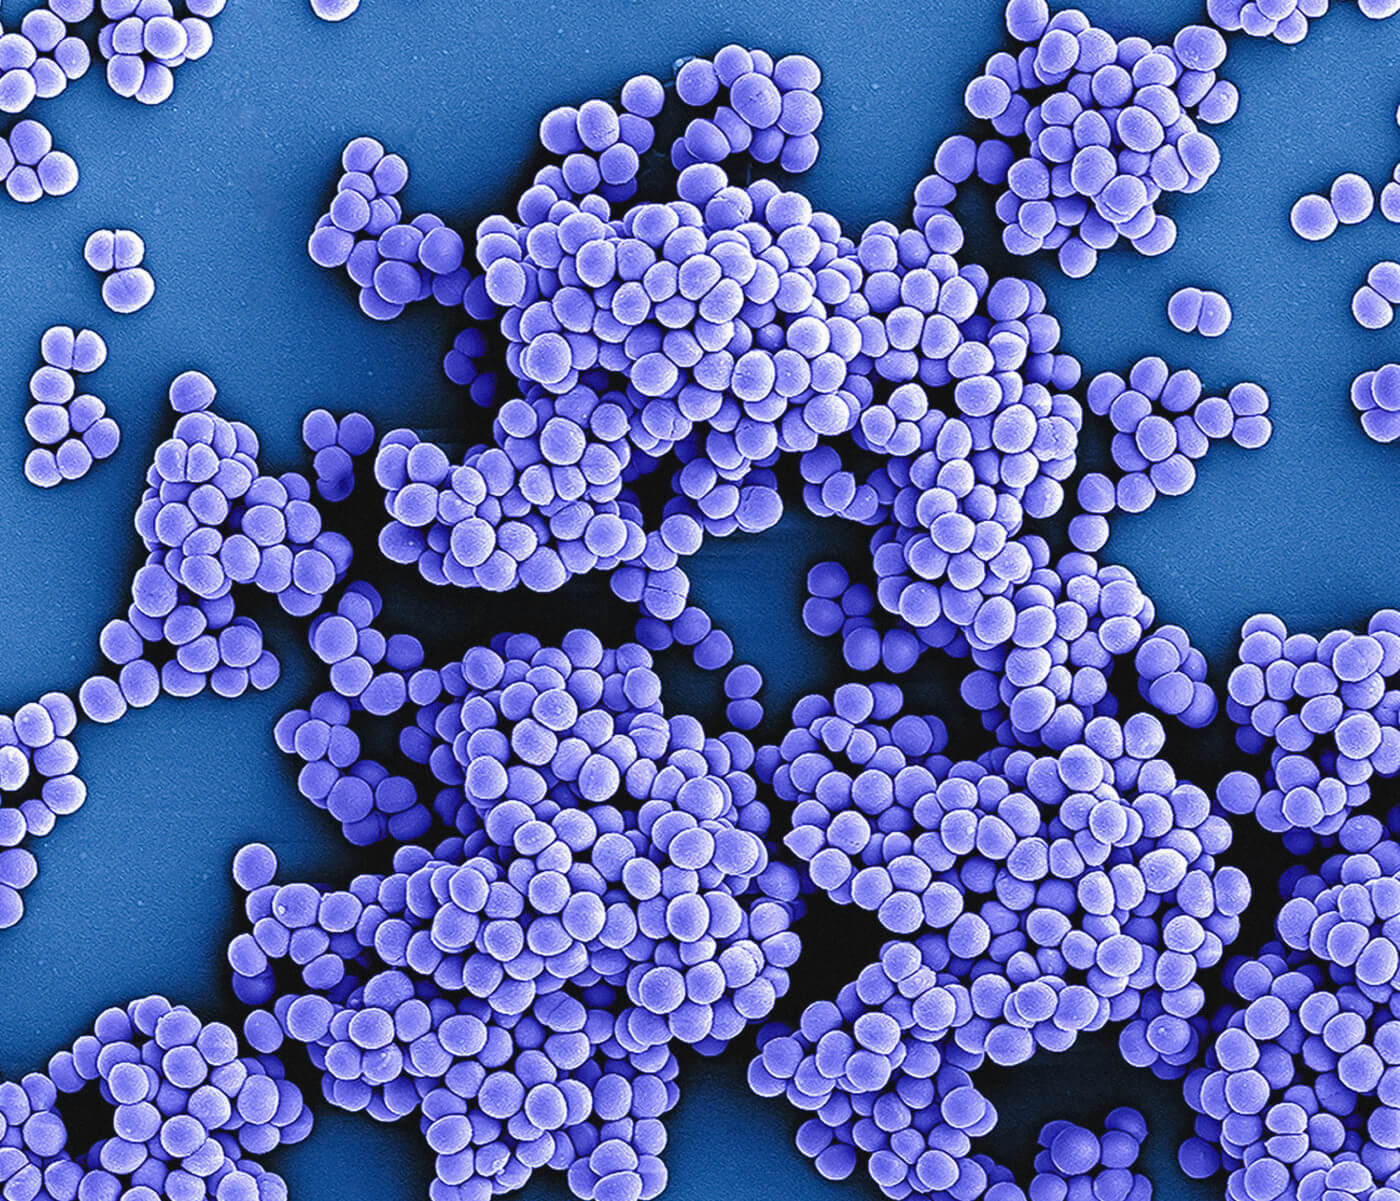 Image of staphylococcus aureus by National Institute of Allergy and Infectious Diseases